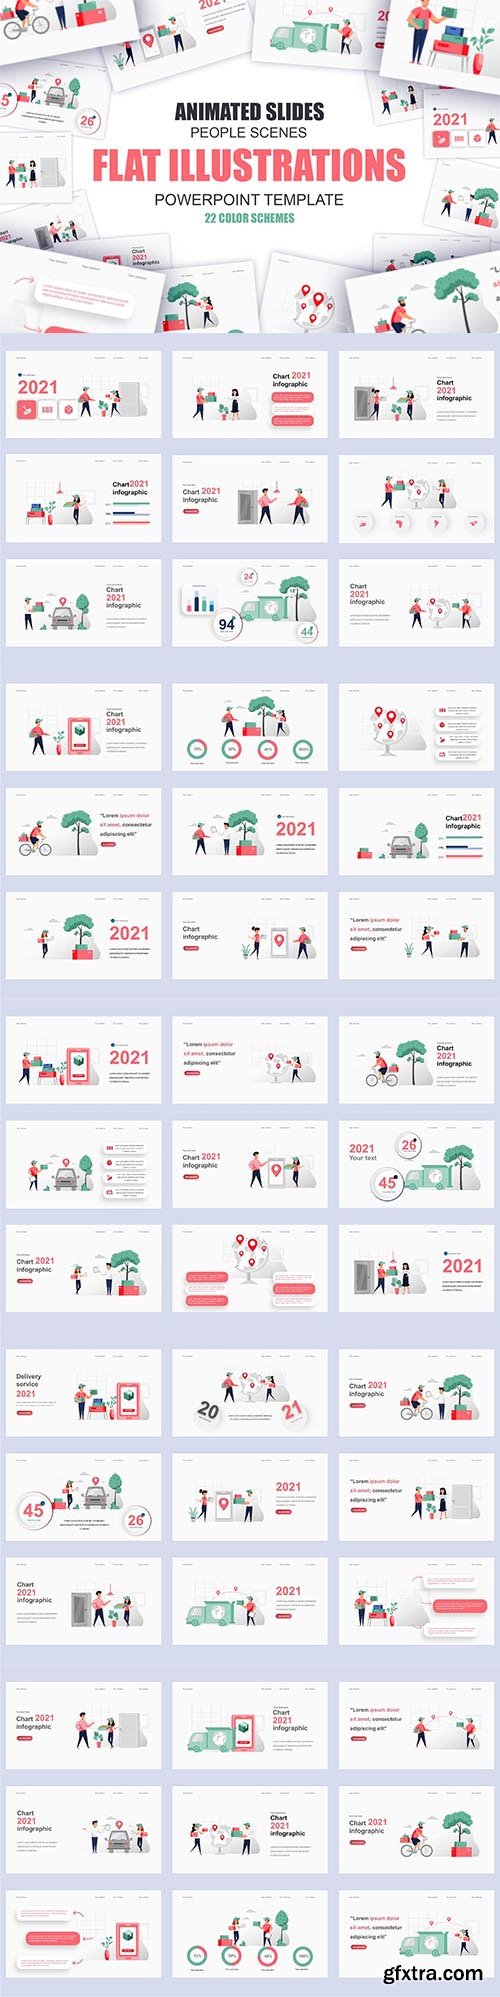 Delivery Illustration Powerpoint Template